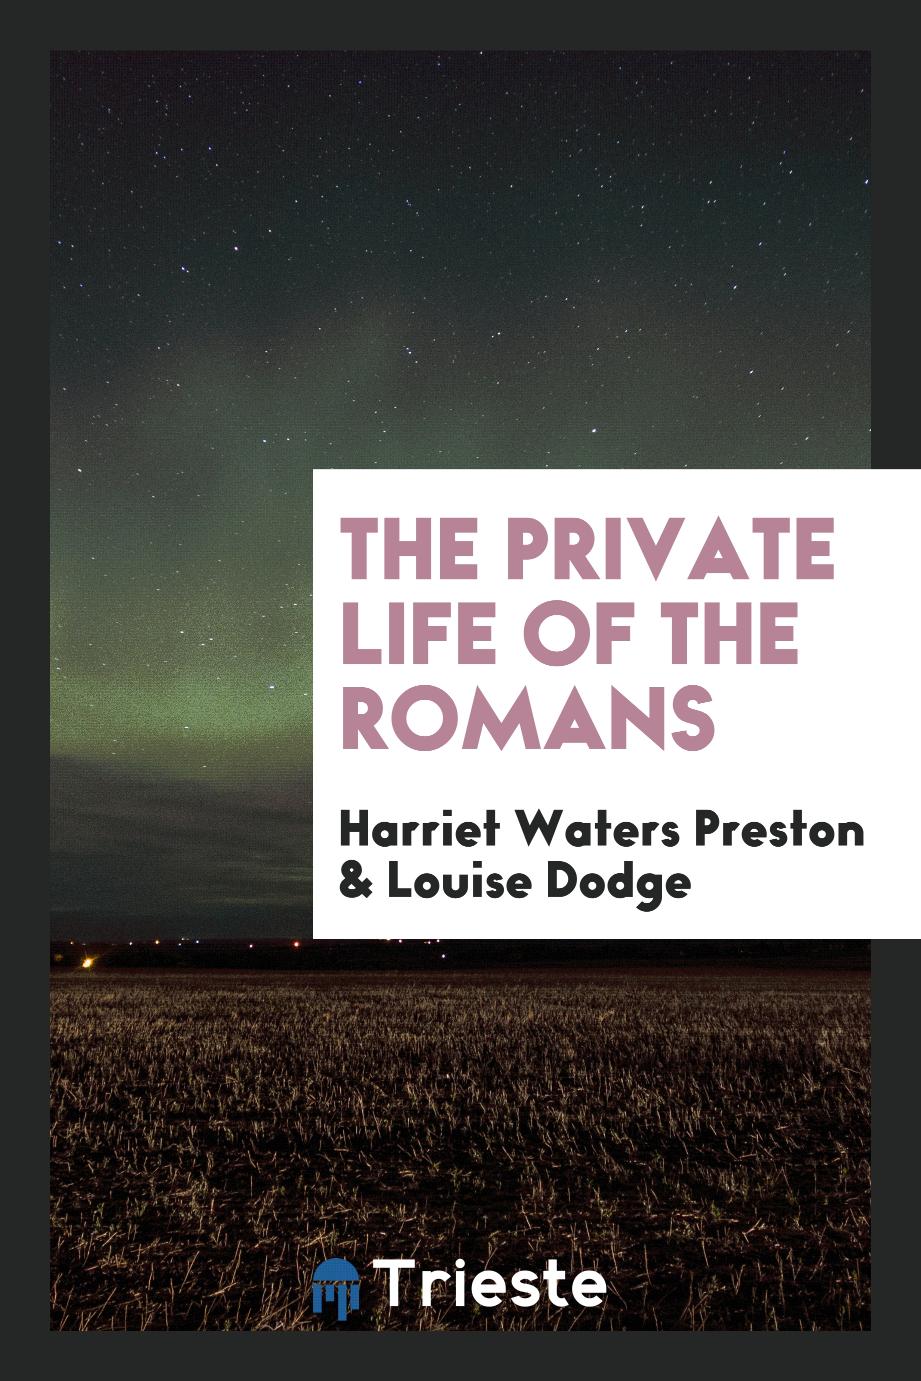 Harriet Waters Preston, Louise Dodge - The private life of the Romans